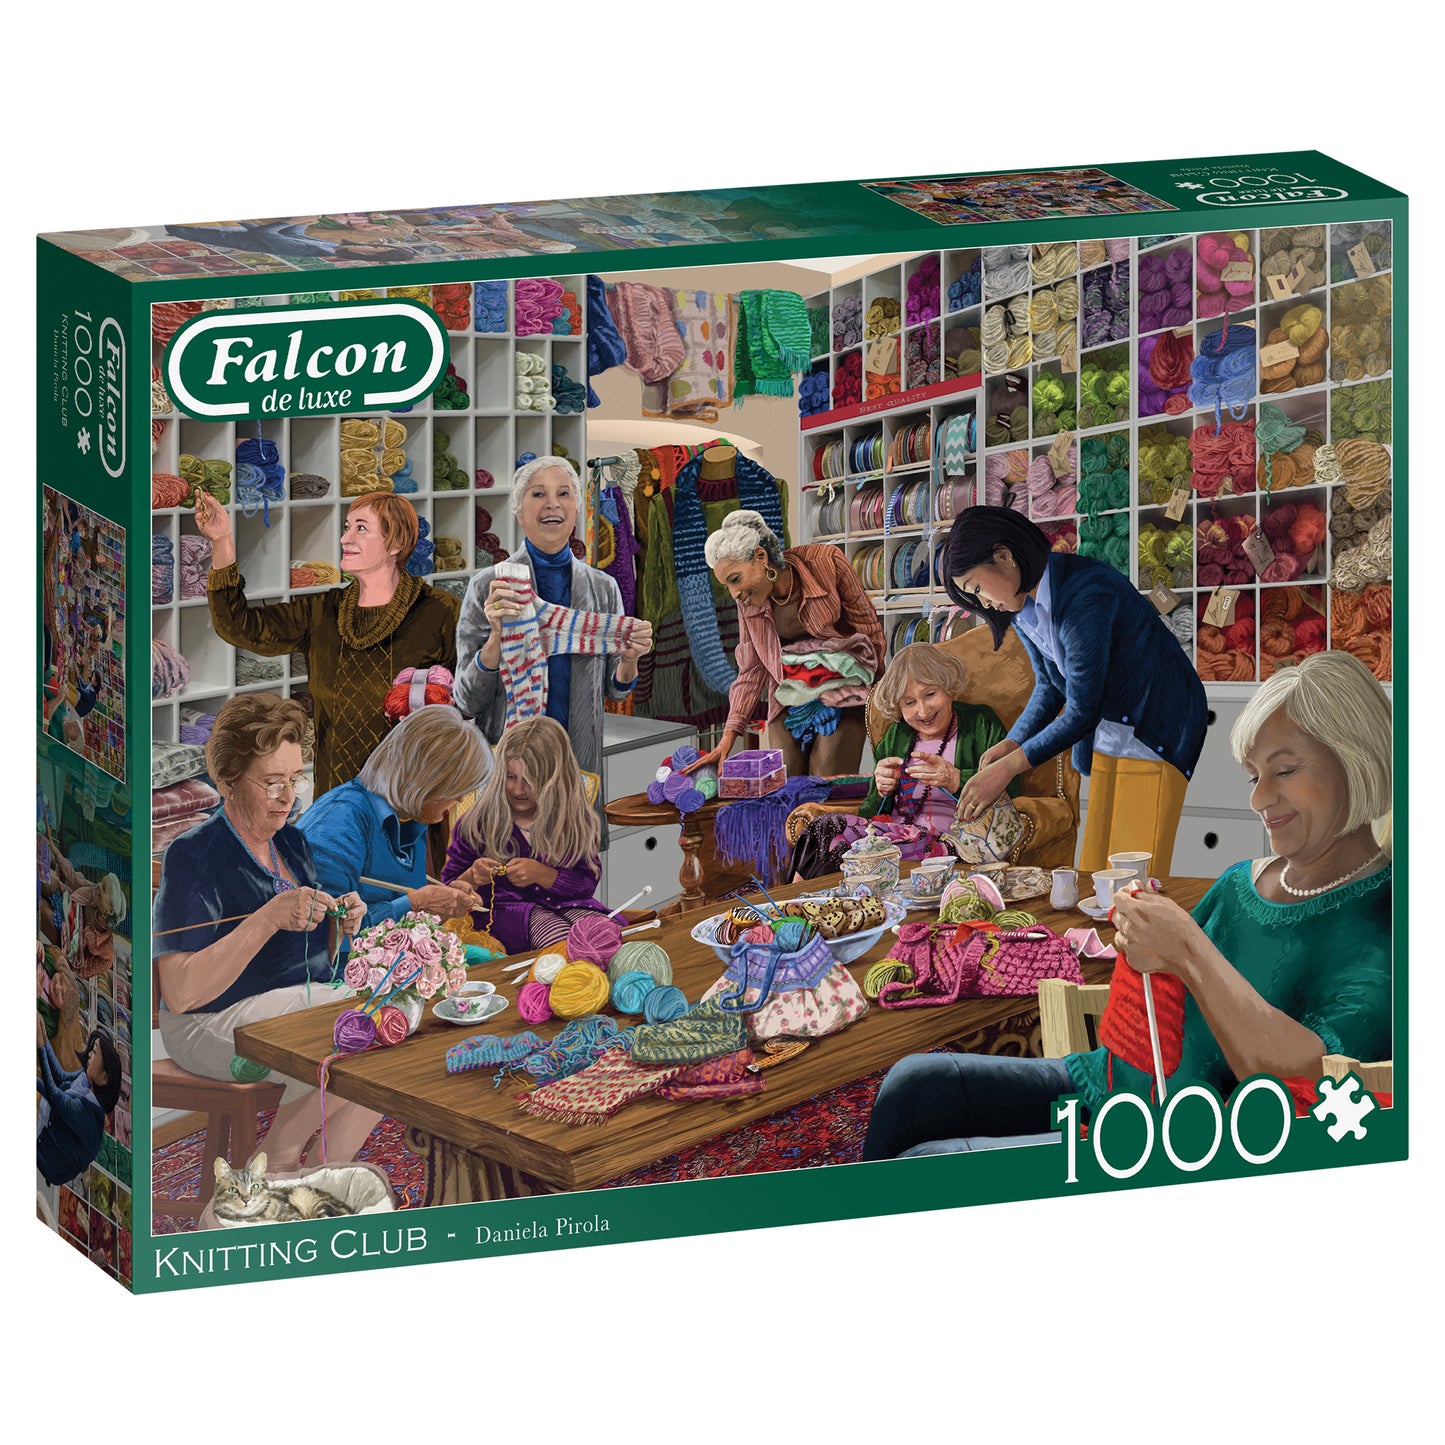 Falcon - The Knitting Club (1000 pieces) - product image - Jumboplay.com